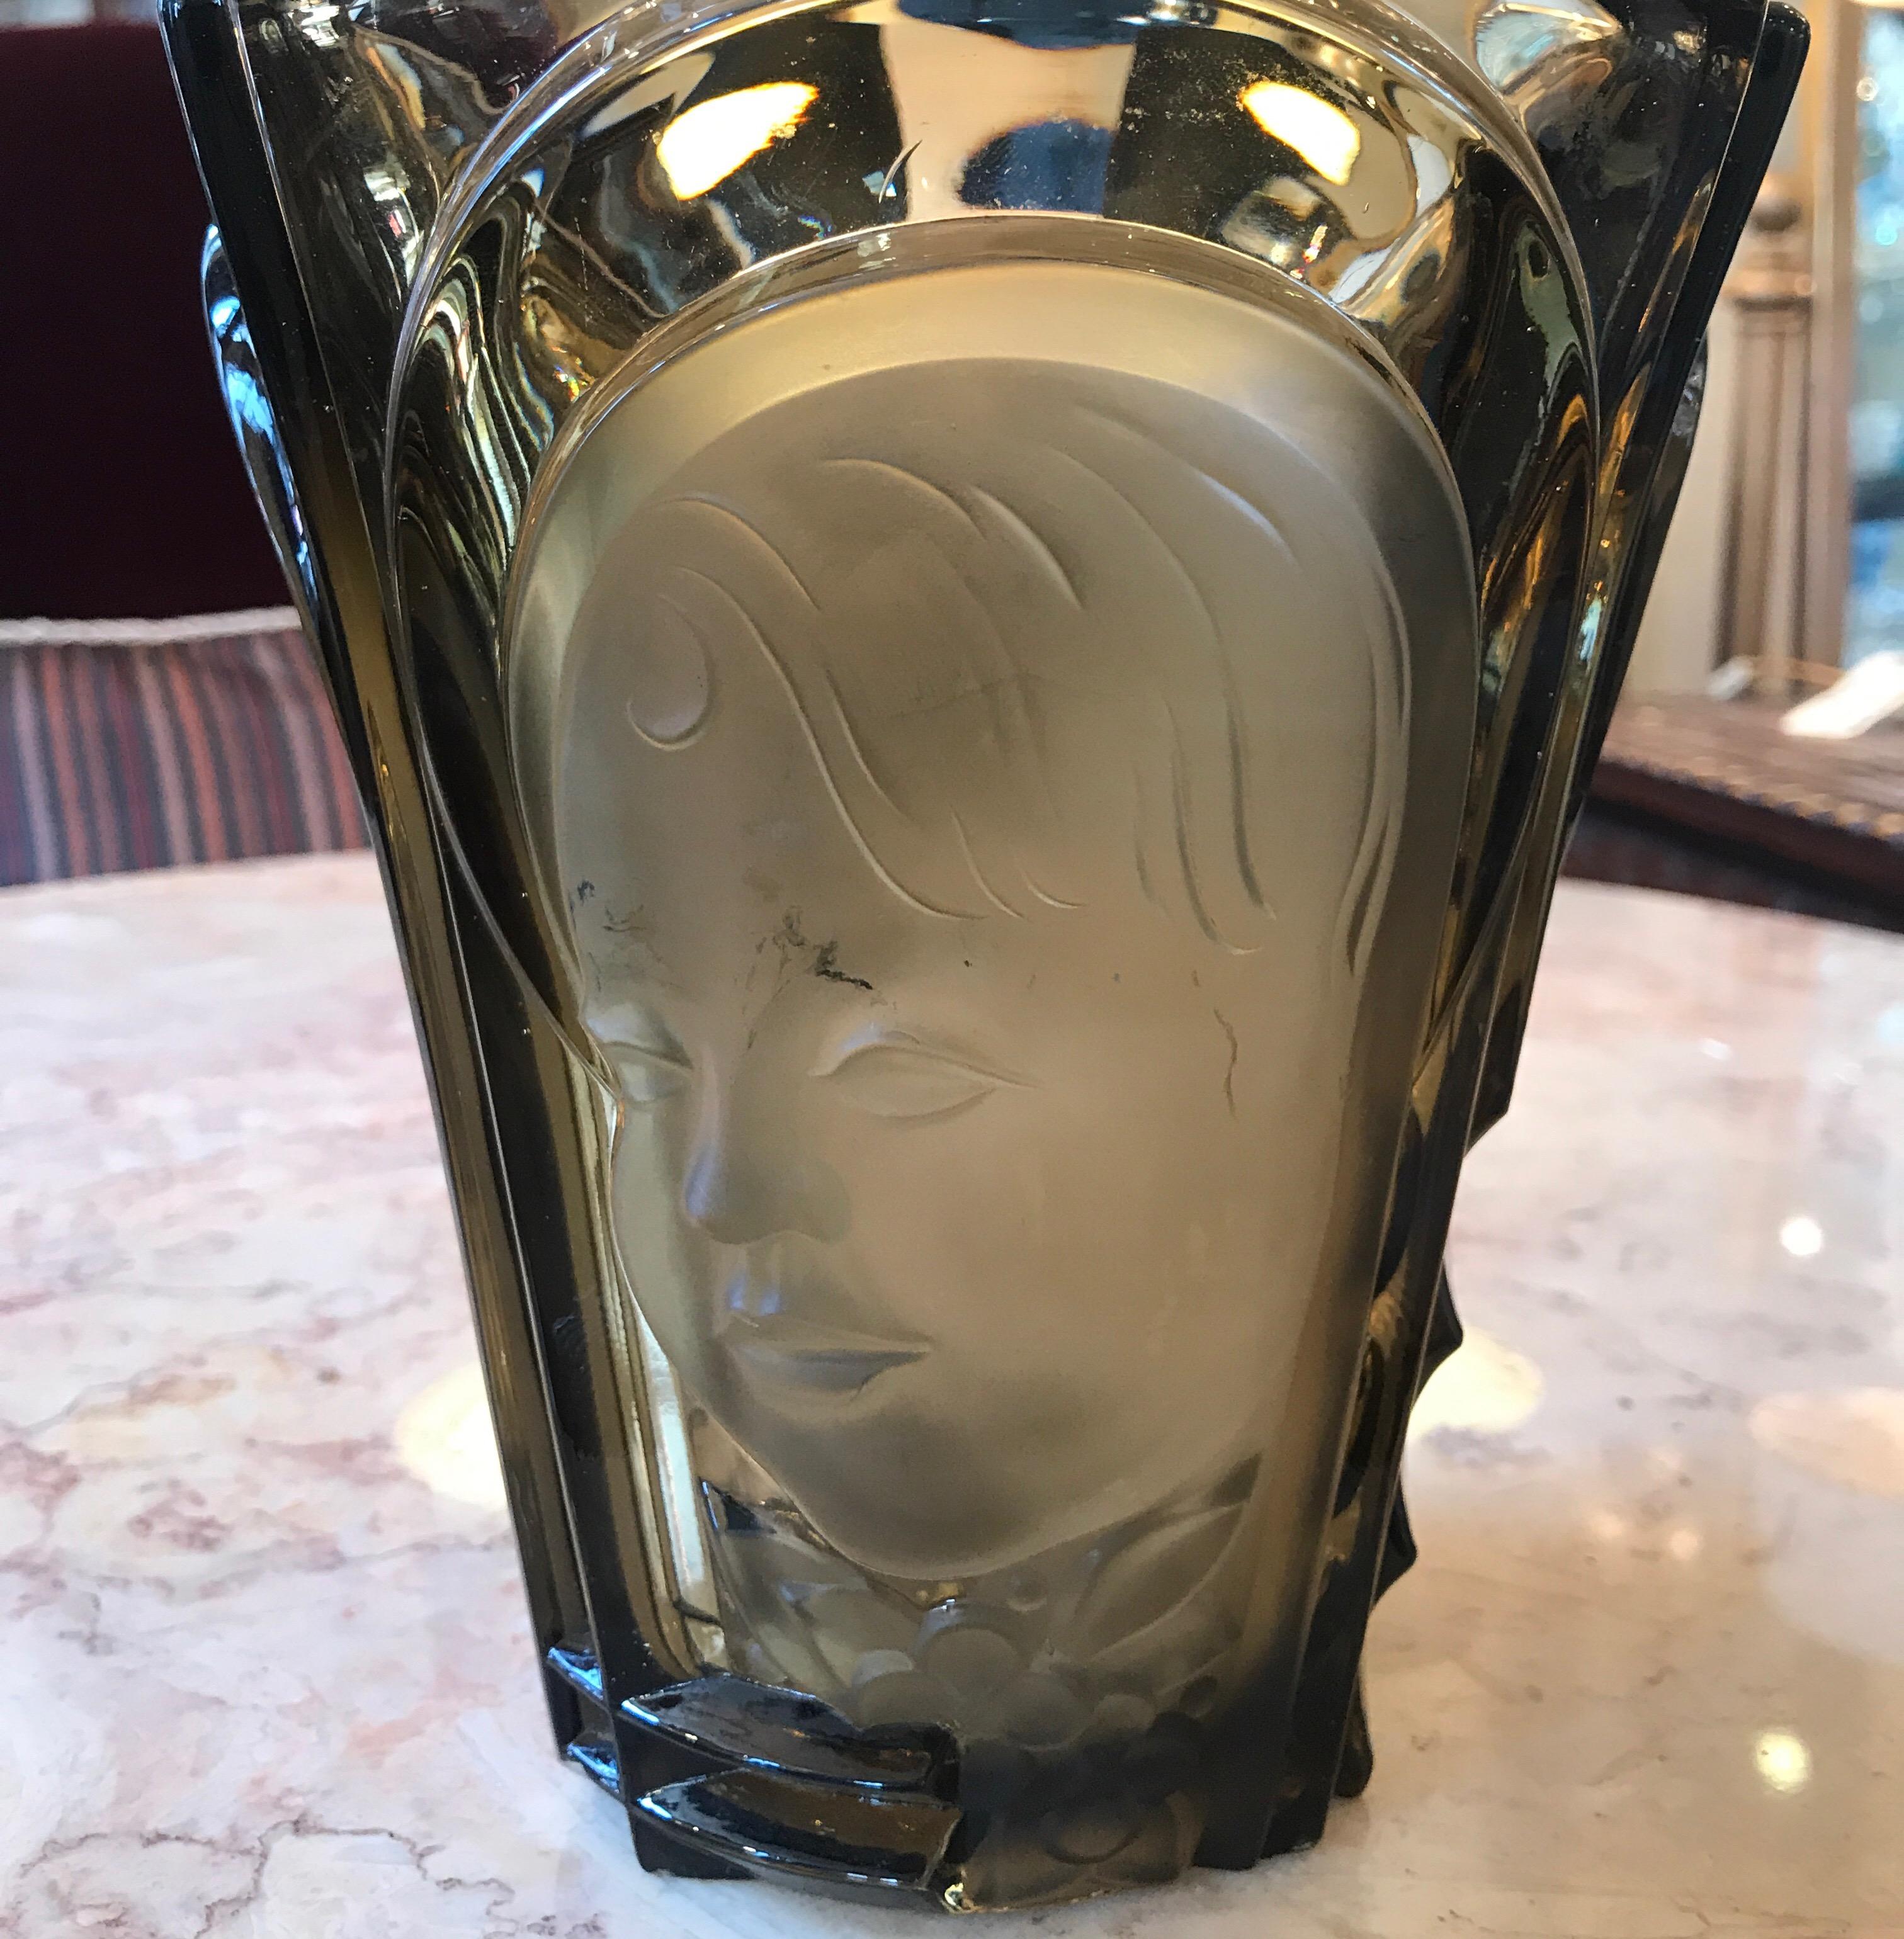 Stunning Art Deco glass vase with triple faces by Walther & Sohne. The smokey topaz glass with frosted faces on three panels around the outside, Germany, 1935.